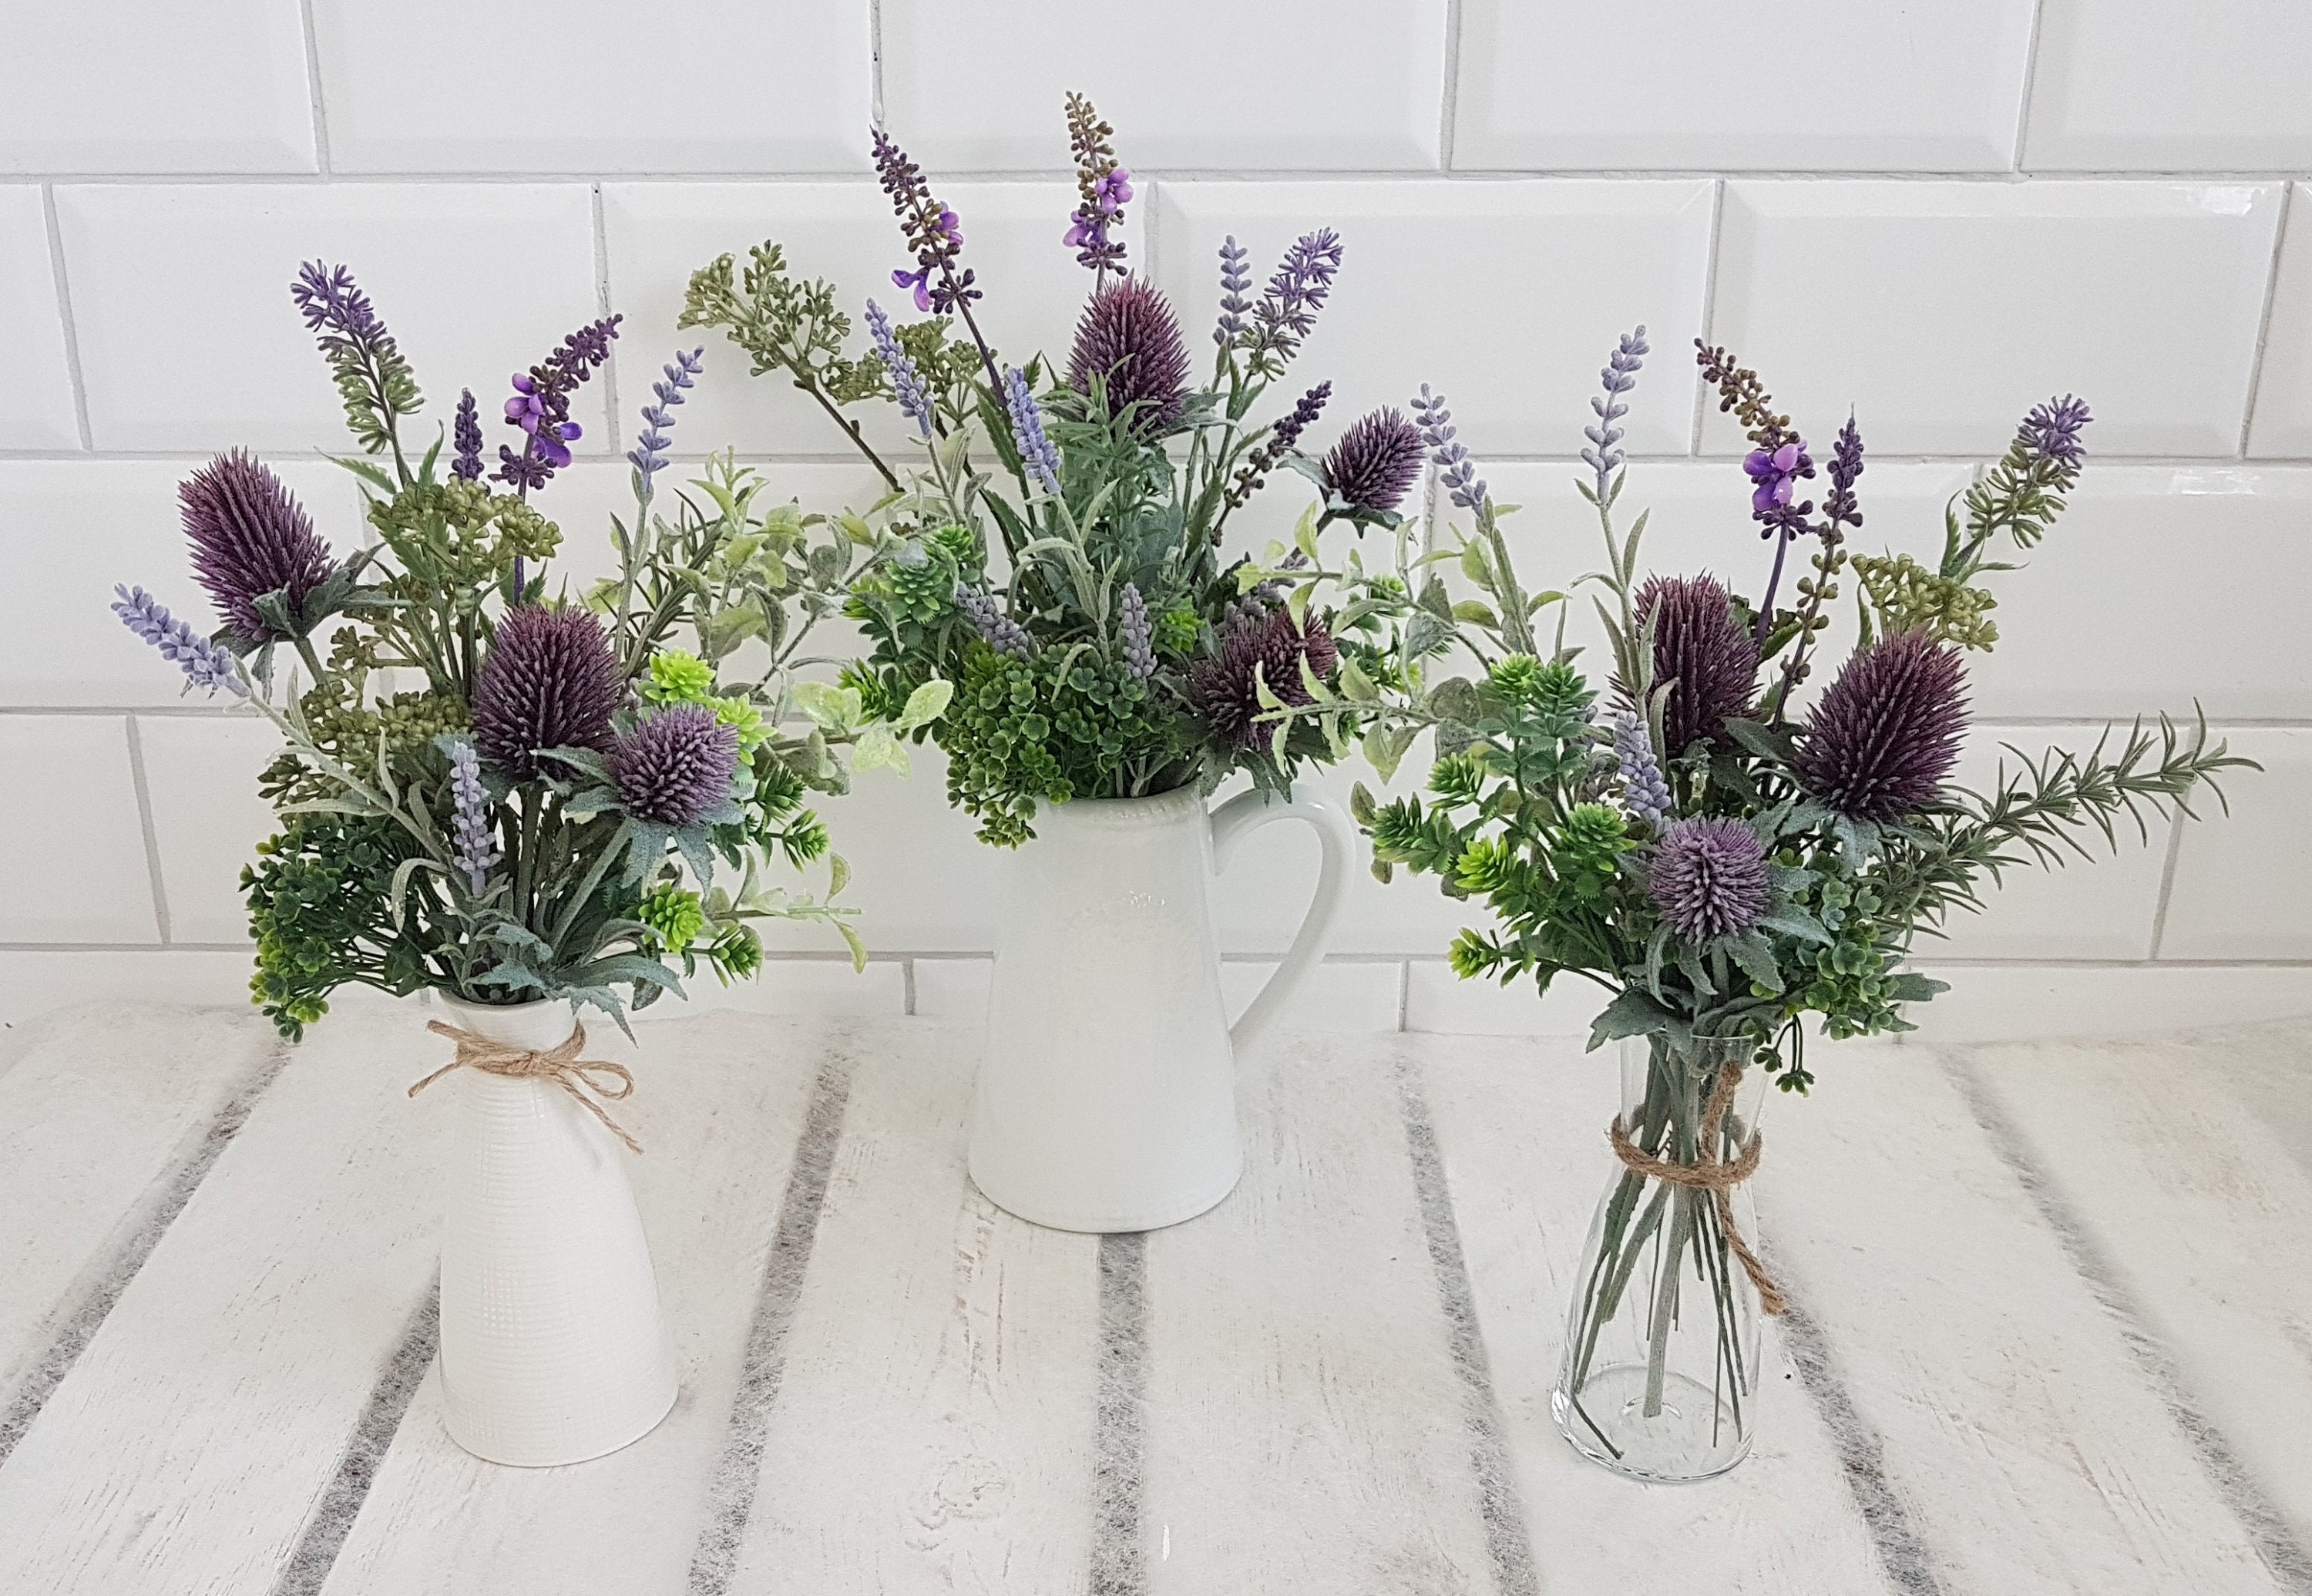 Dried Flowers for Vase Dried Plants Lavender Daisies Wild Meadow Flowers  Bridal Bouquet Gift for Mom Mother Day Home Spring Arrangement 